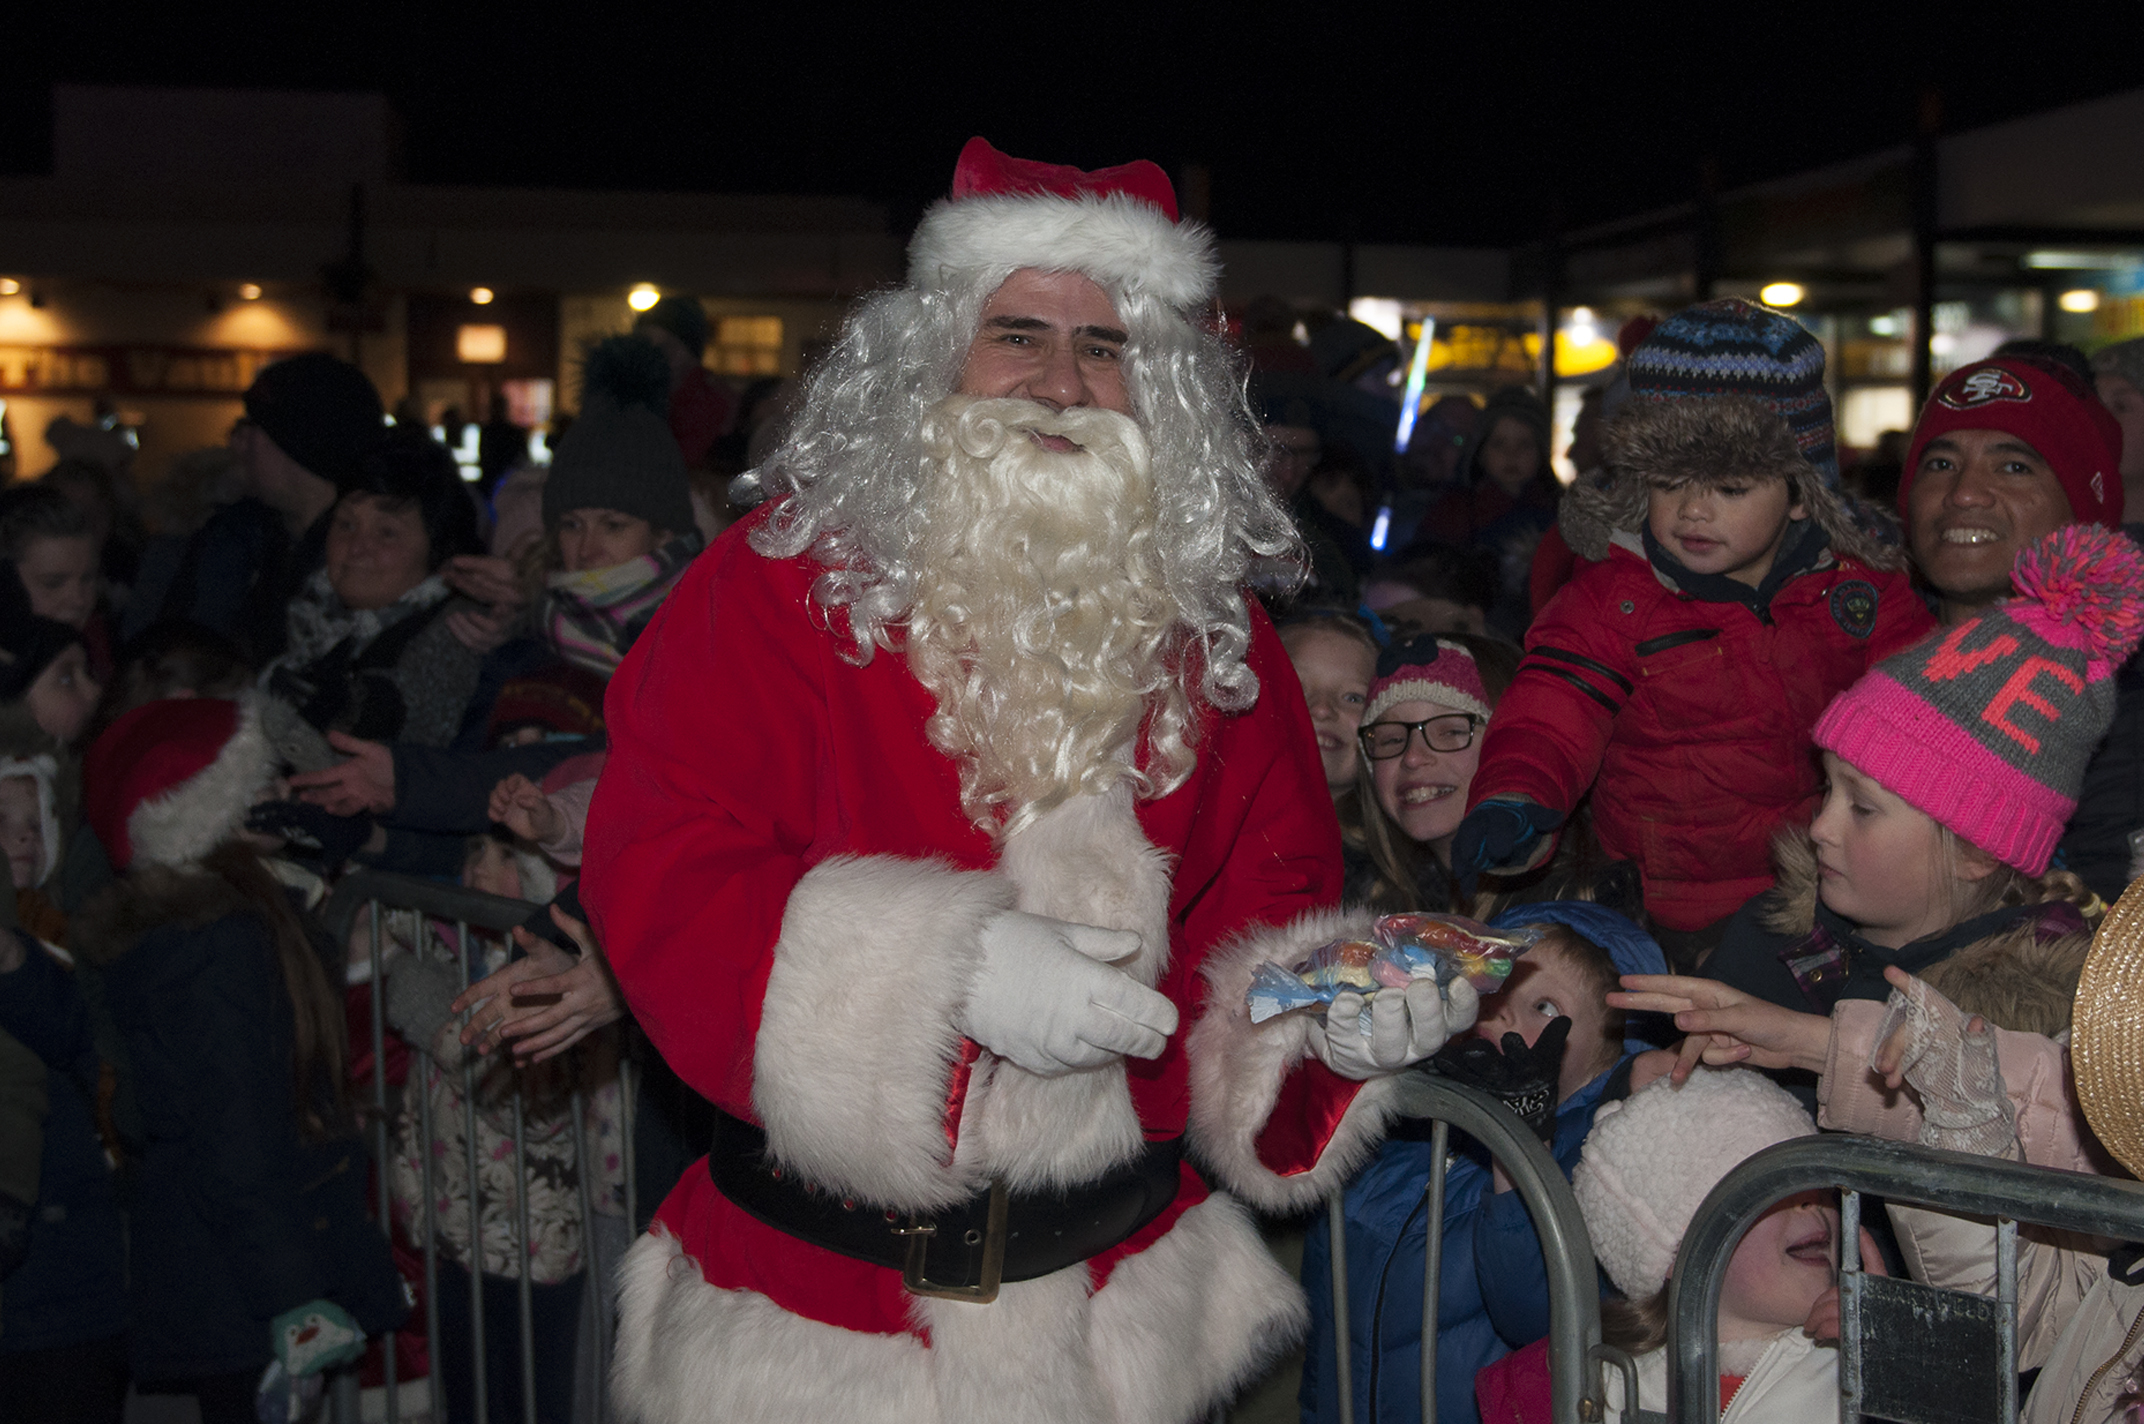 The children meet Santa at the Monifieth Christmas lights switch-on.